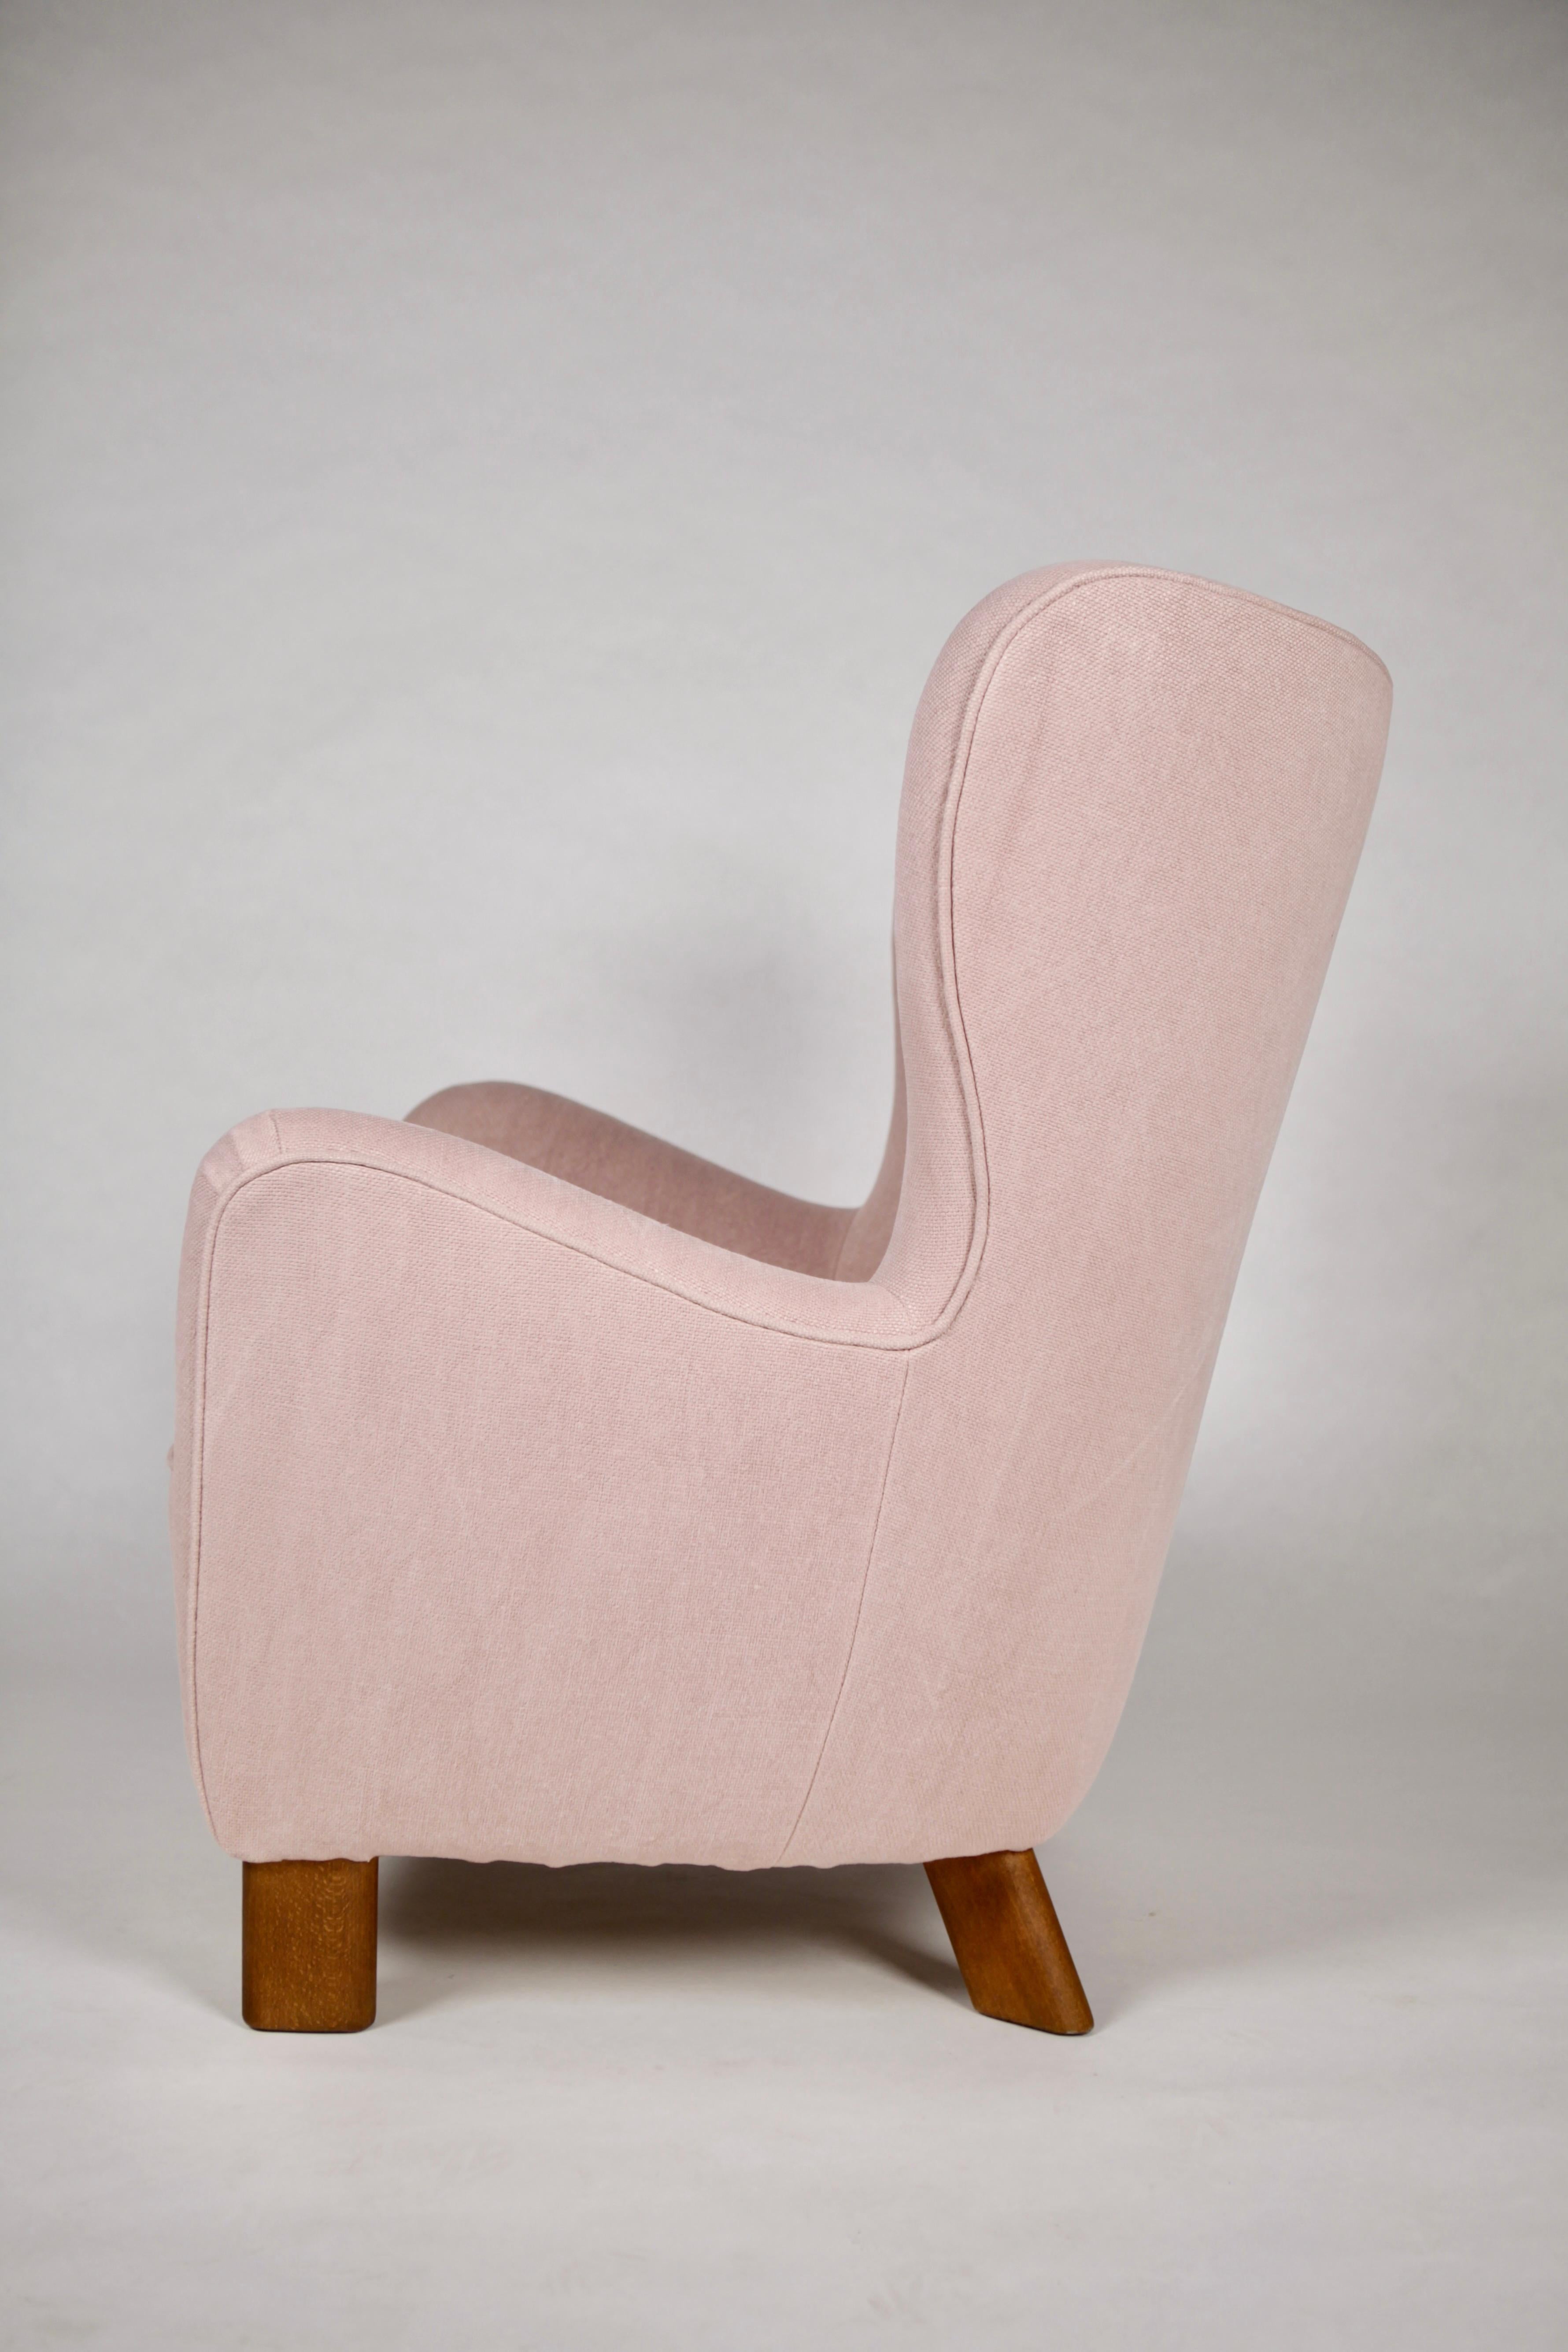 A rare Fritz Hansen high back version of the 1669 lounge armchair.
Designed and manufactured by Fritz Hansen,
New upholstered in raw natural pale rose colored linen,
Denmark, 1940.
  